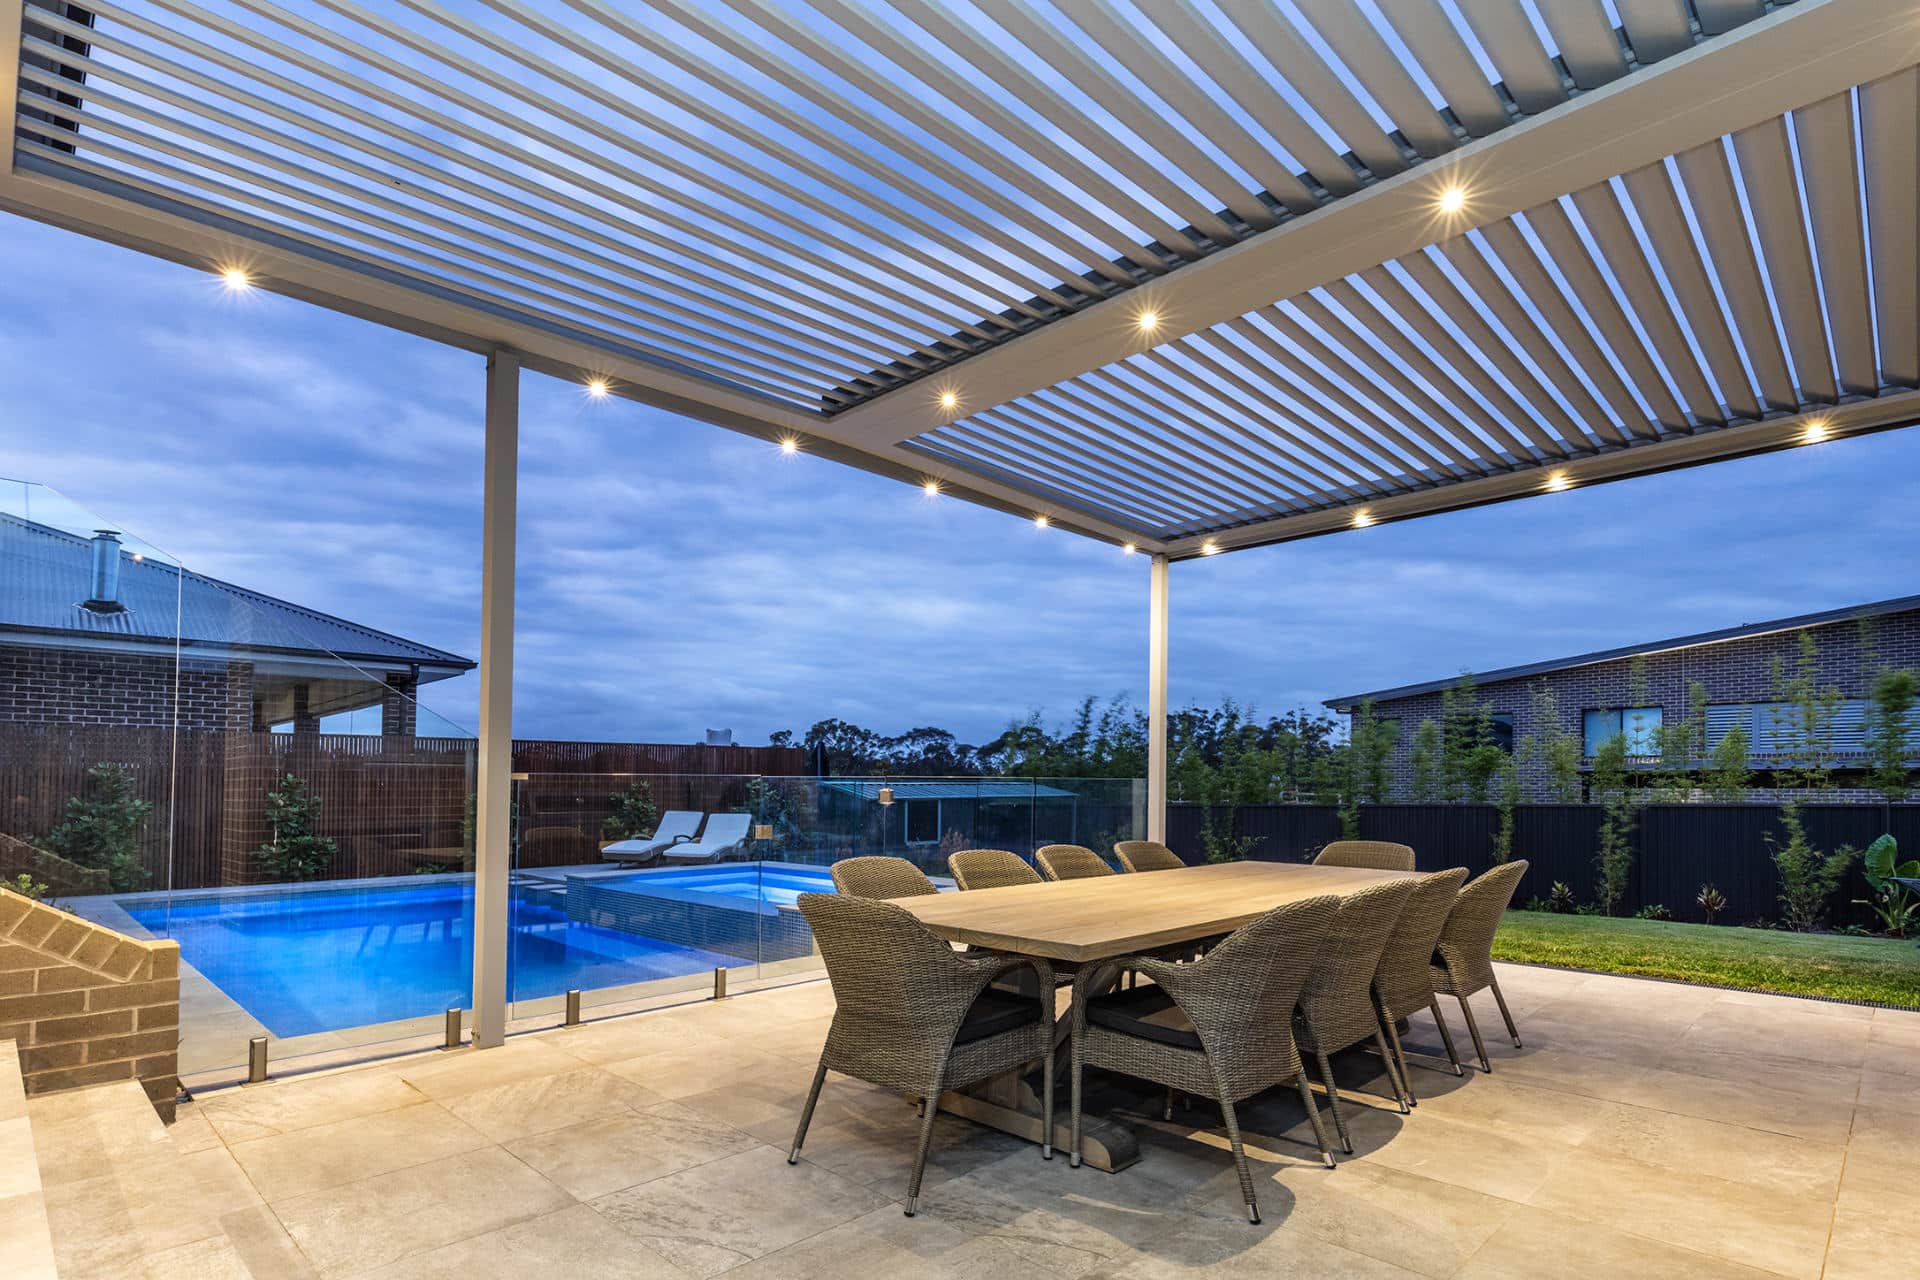 A new opening roof pergola alongside pool area showcasing the sophisticated integrated LED lighting